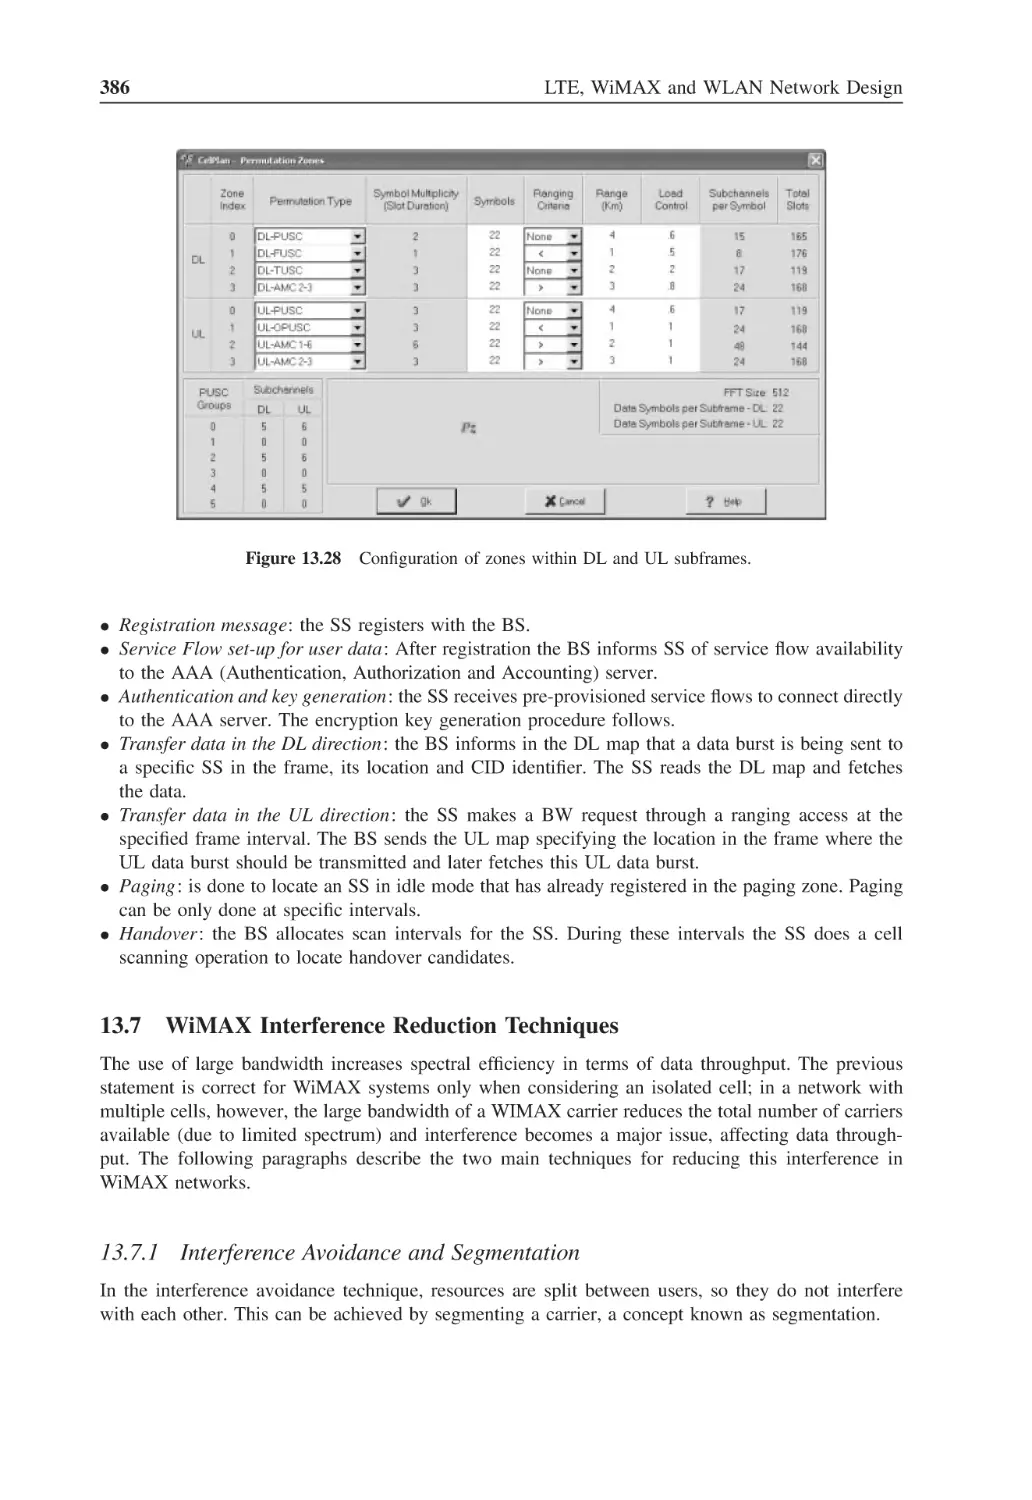 13.7 WiMAX Interference Reduction Techniques
13.7.1 Interference Avoidance and Segmentation